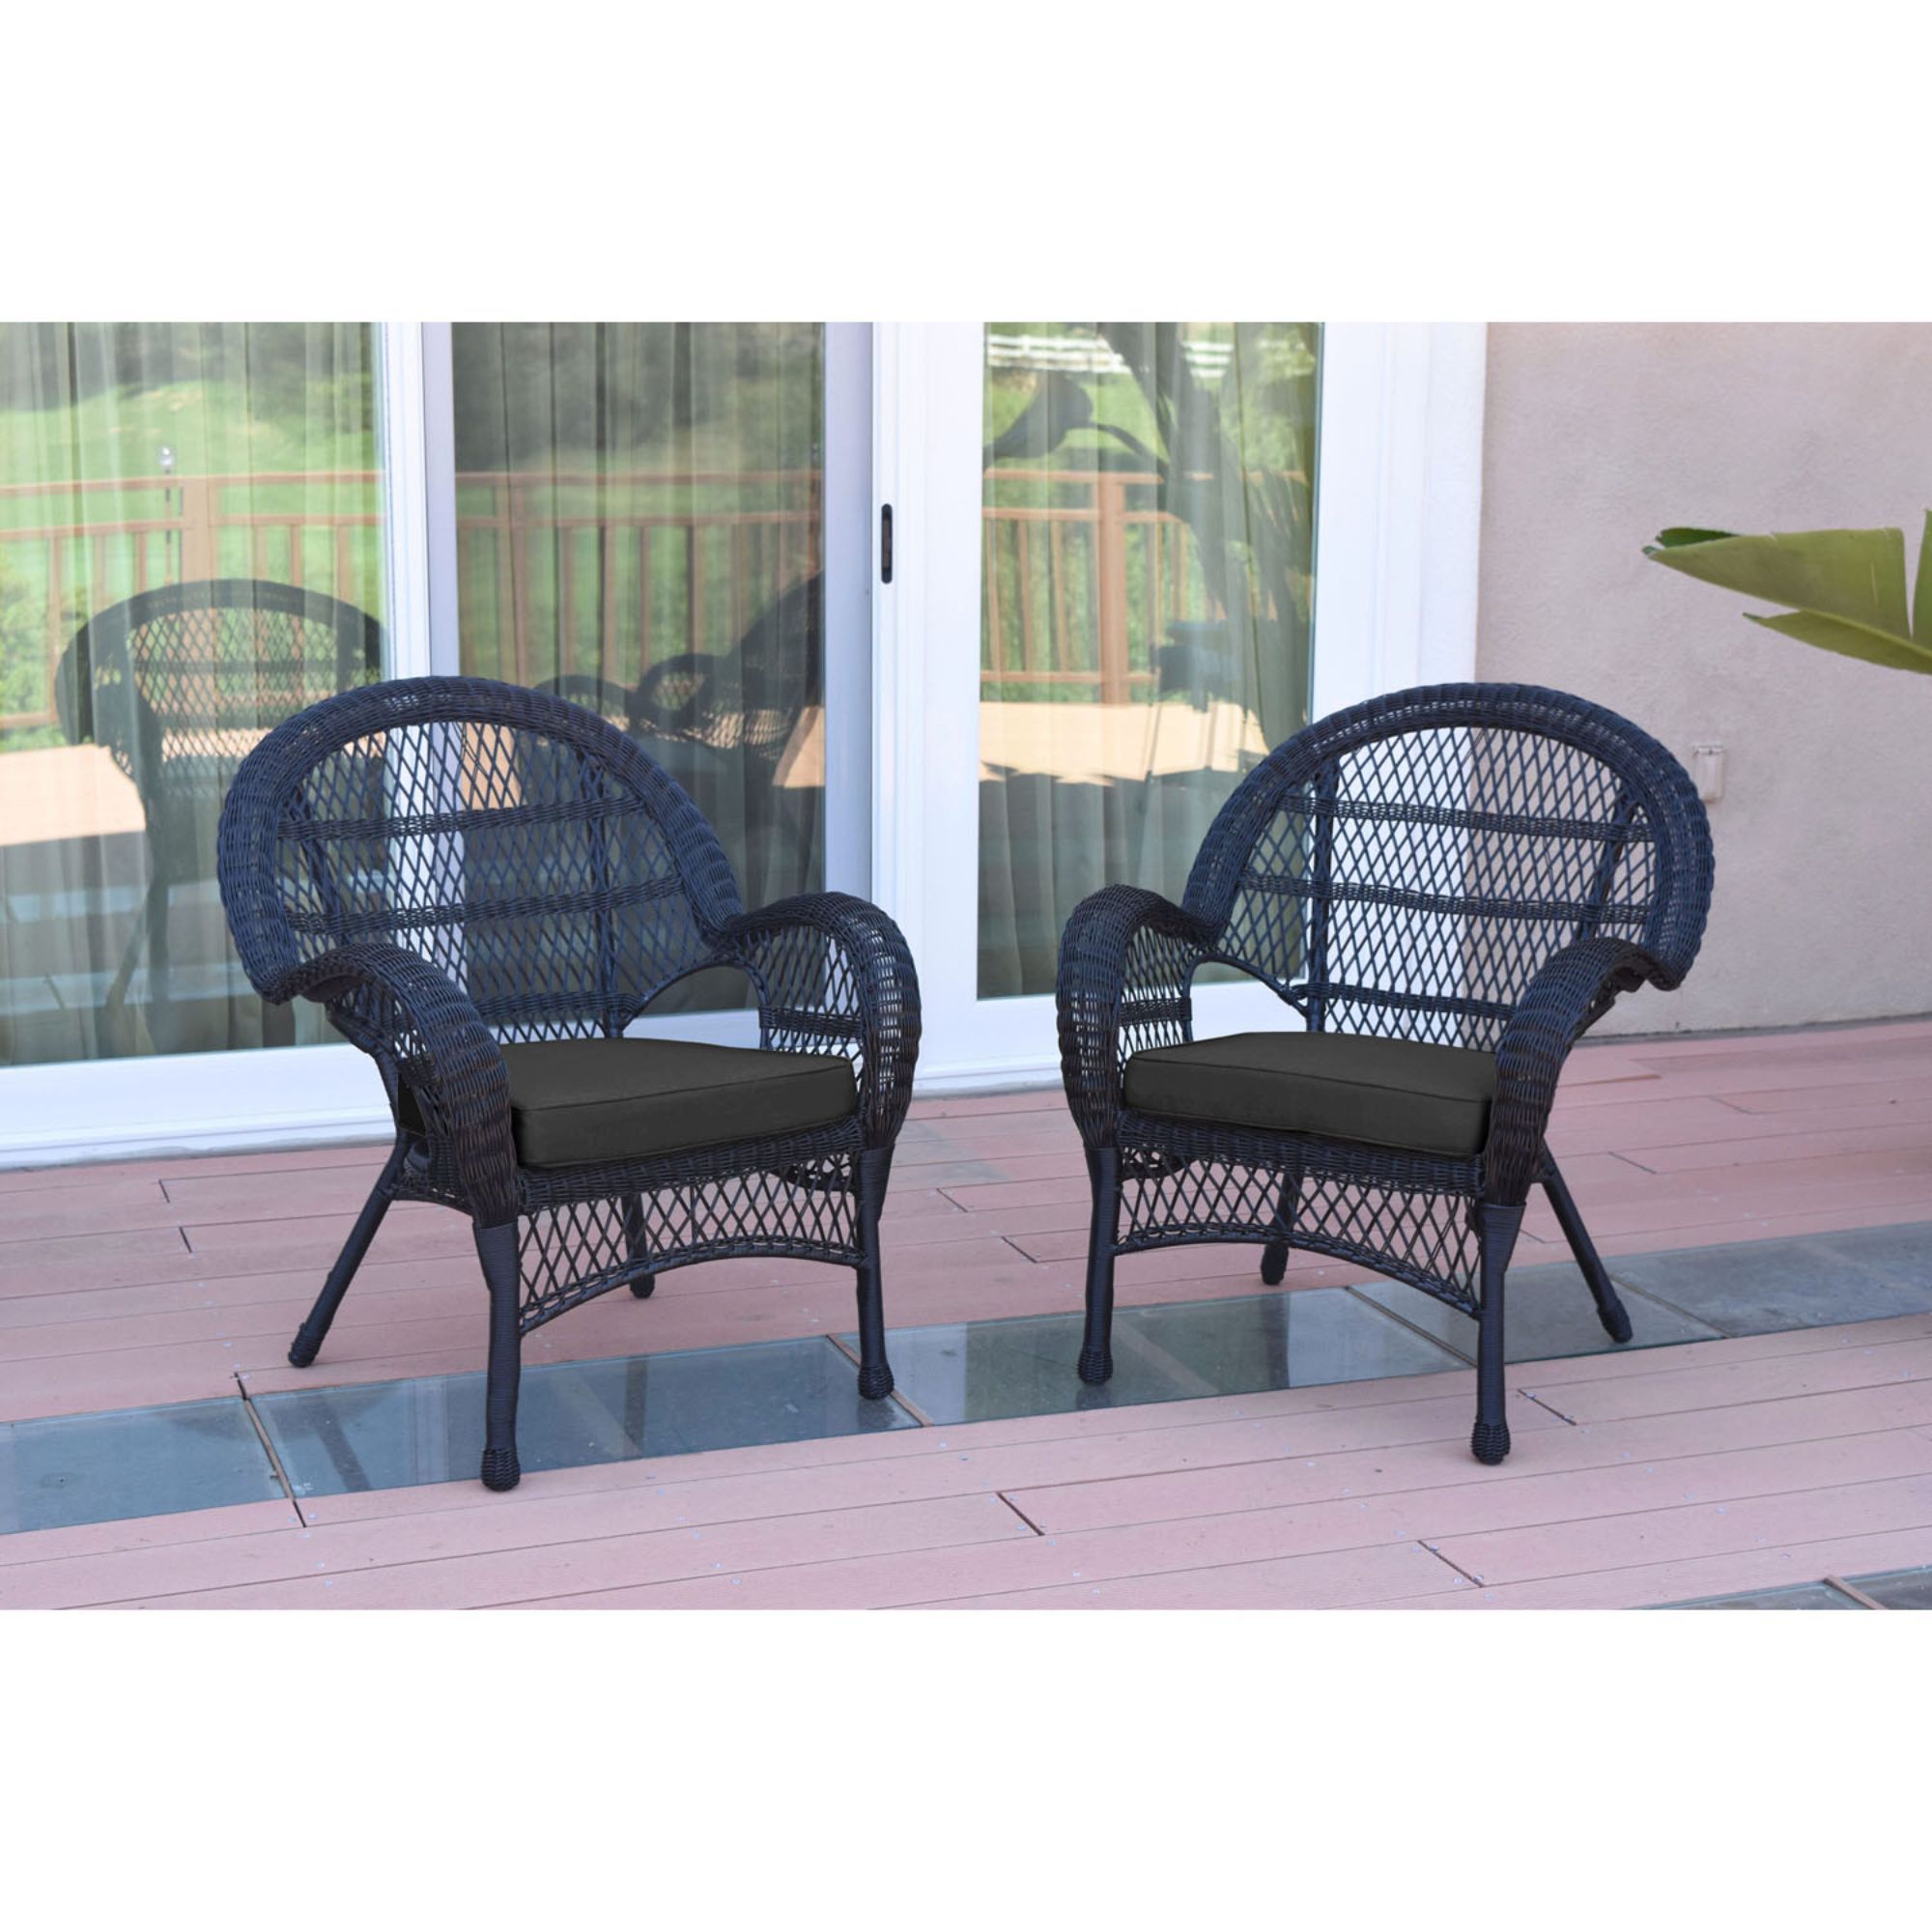 2 Piece Black Outdoor Furniture Patio Resin Wicker Chair With Black Regarding Dark Brown Patio Chairs With Cushions (View 14 of 15)